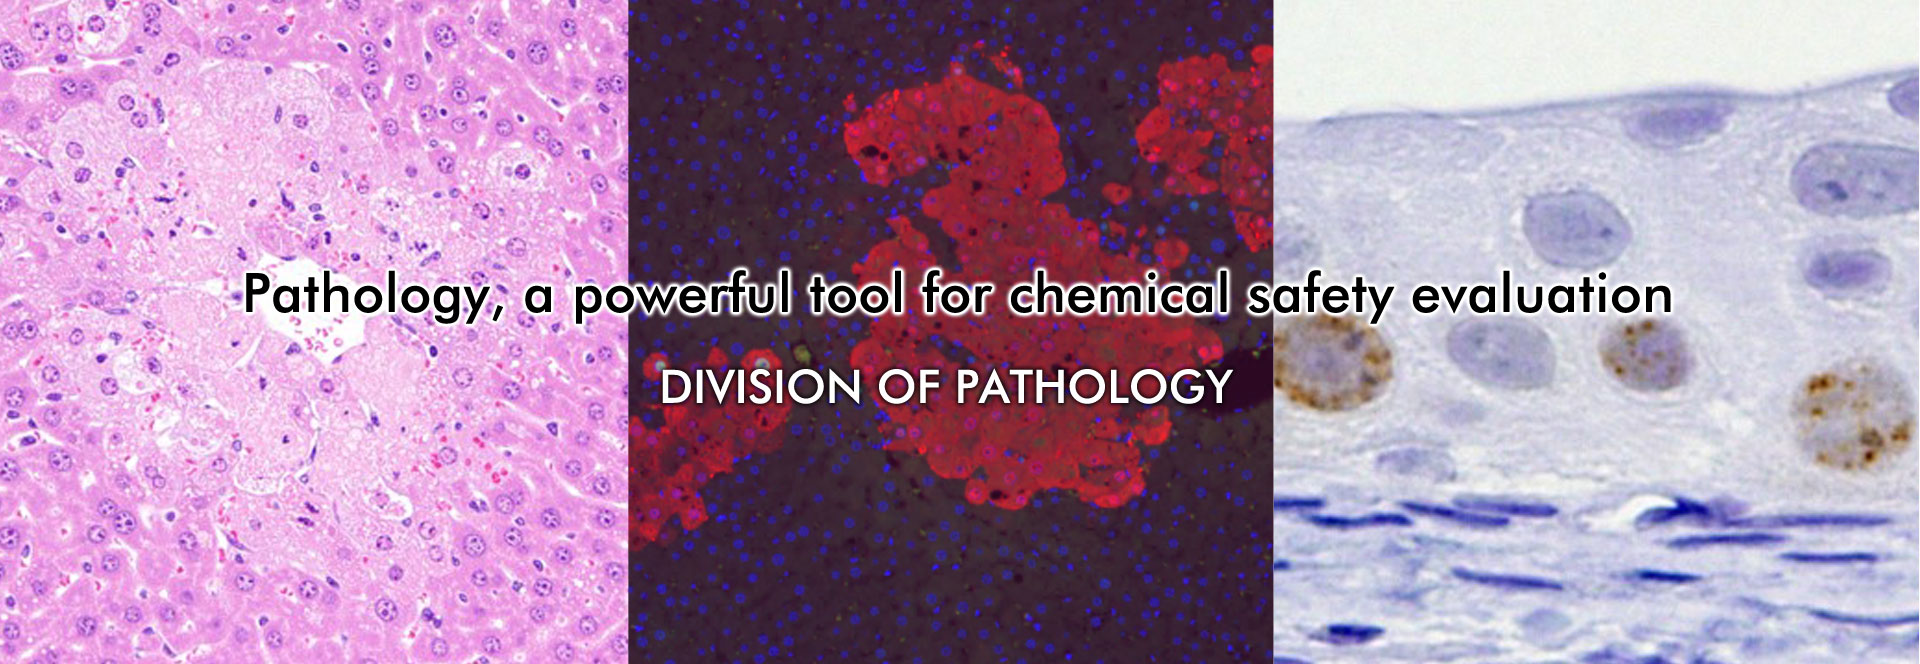 Pathology, a powerful tool for chemical safety evaluation, DIVISION OF PATHOLOGY